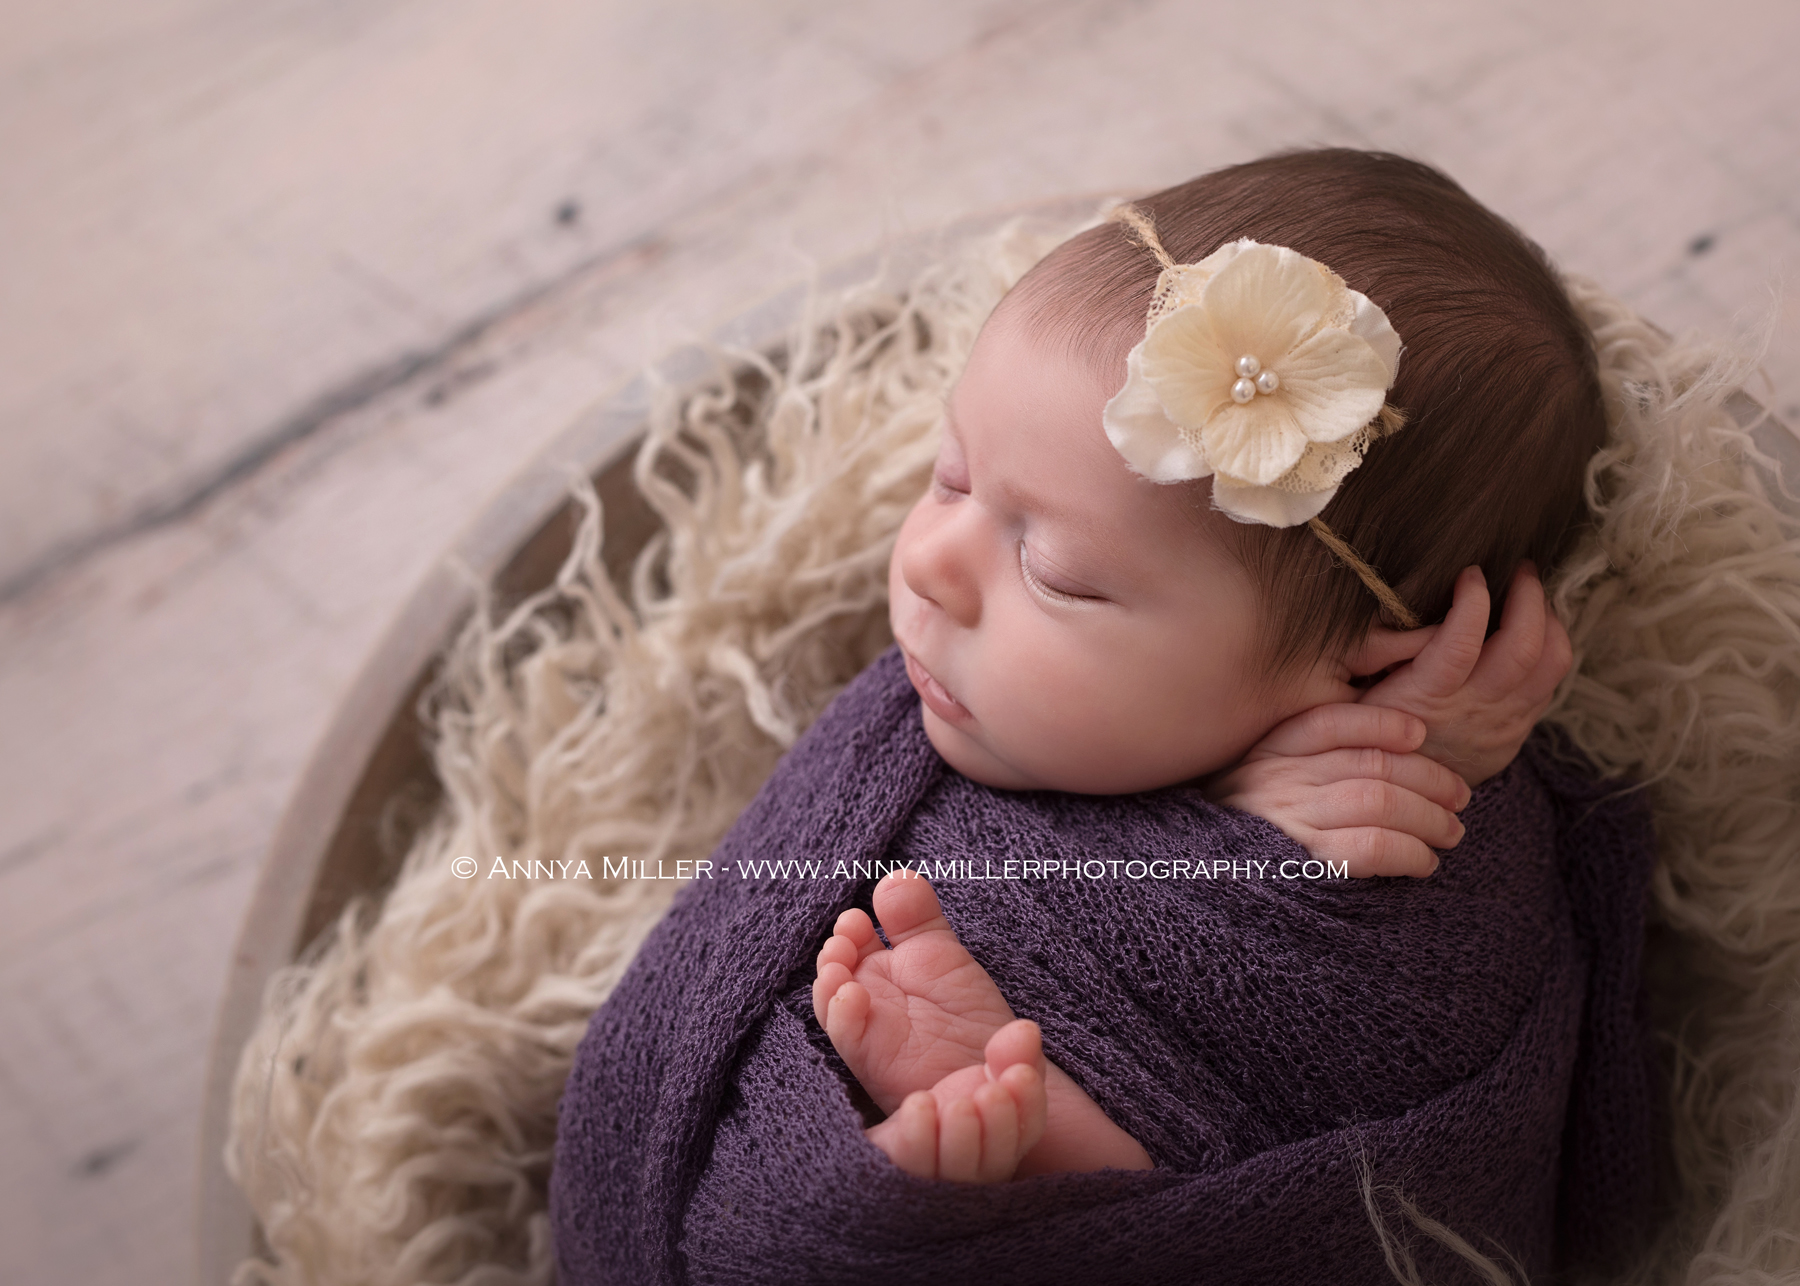 Portraits of a new baby girl by newborn photographer near me Annya Miller of Pickering